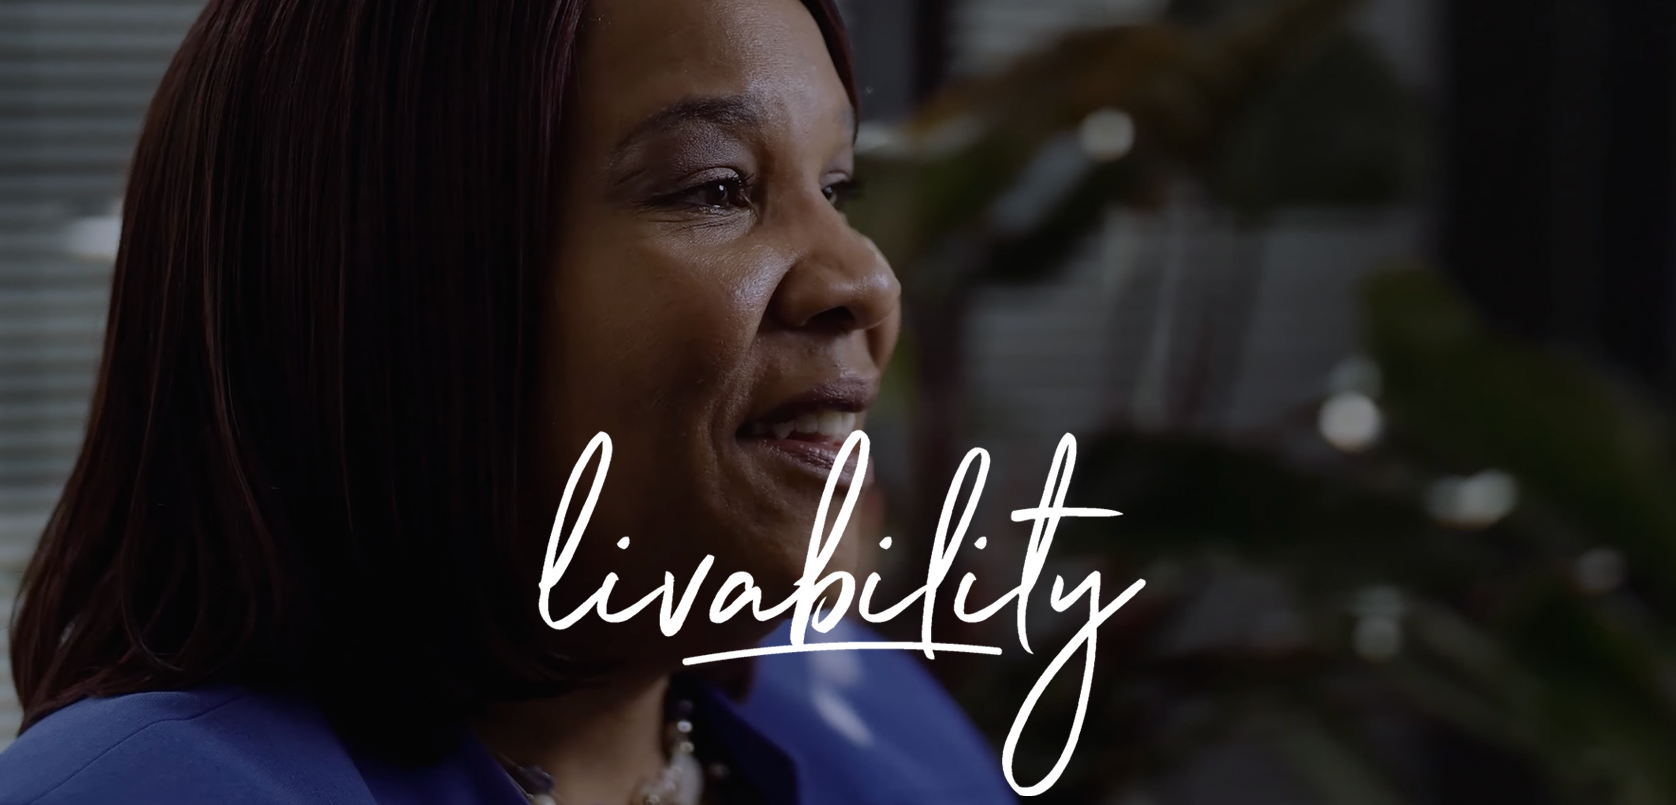 A woman mid-speech with an air of confidence, against an indoor background softly blurred, with the word "livability" stylishly inscribed at the forefront.